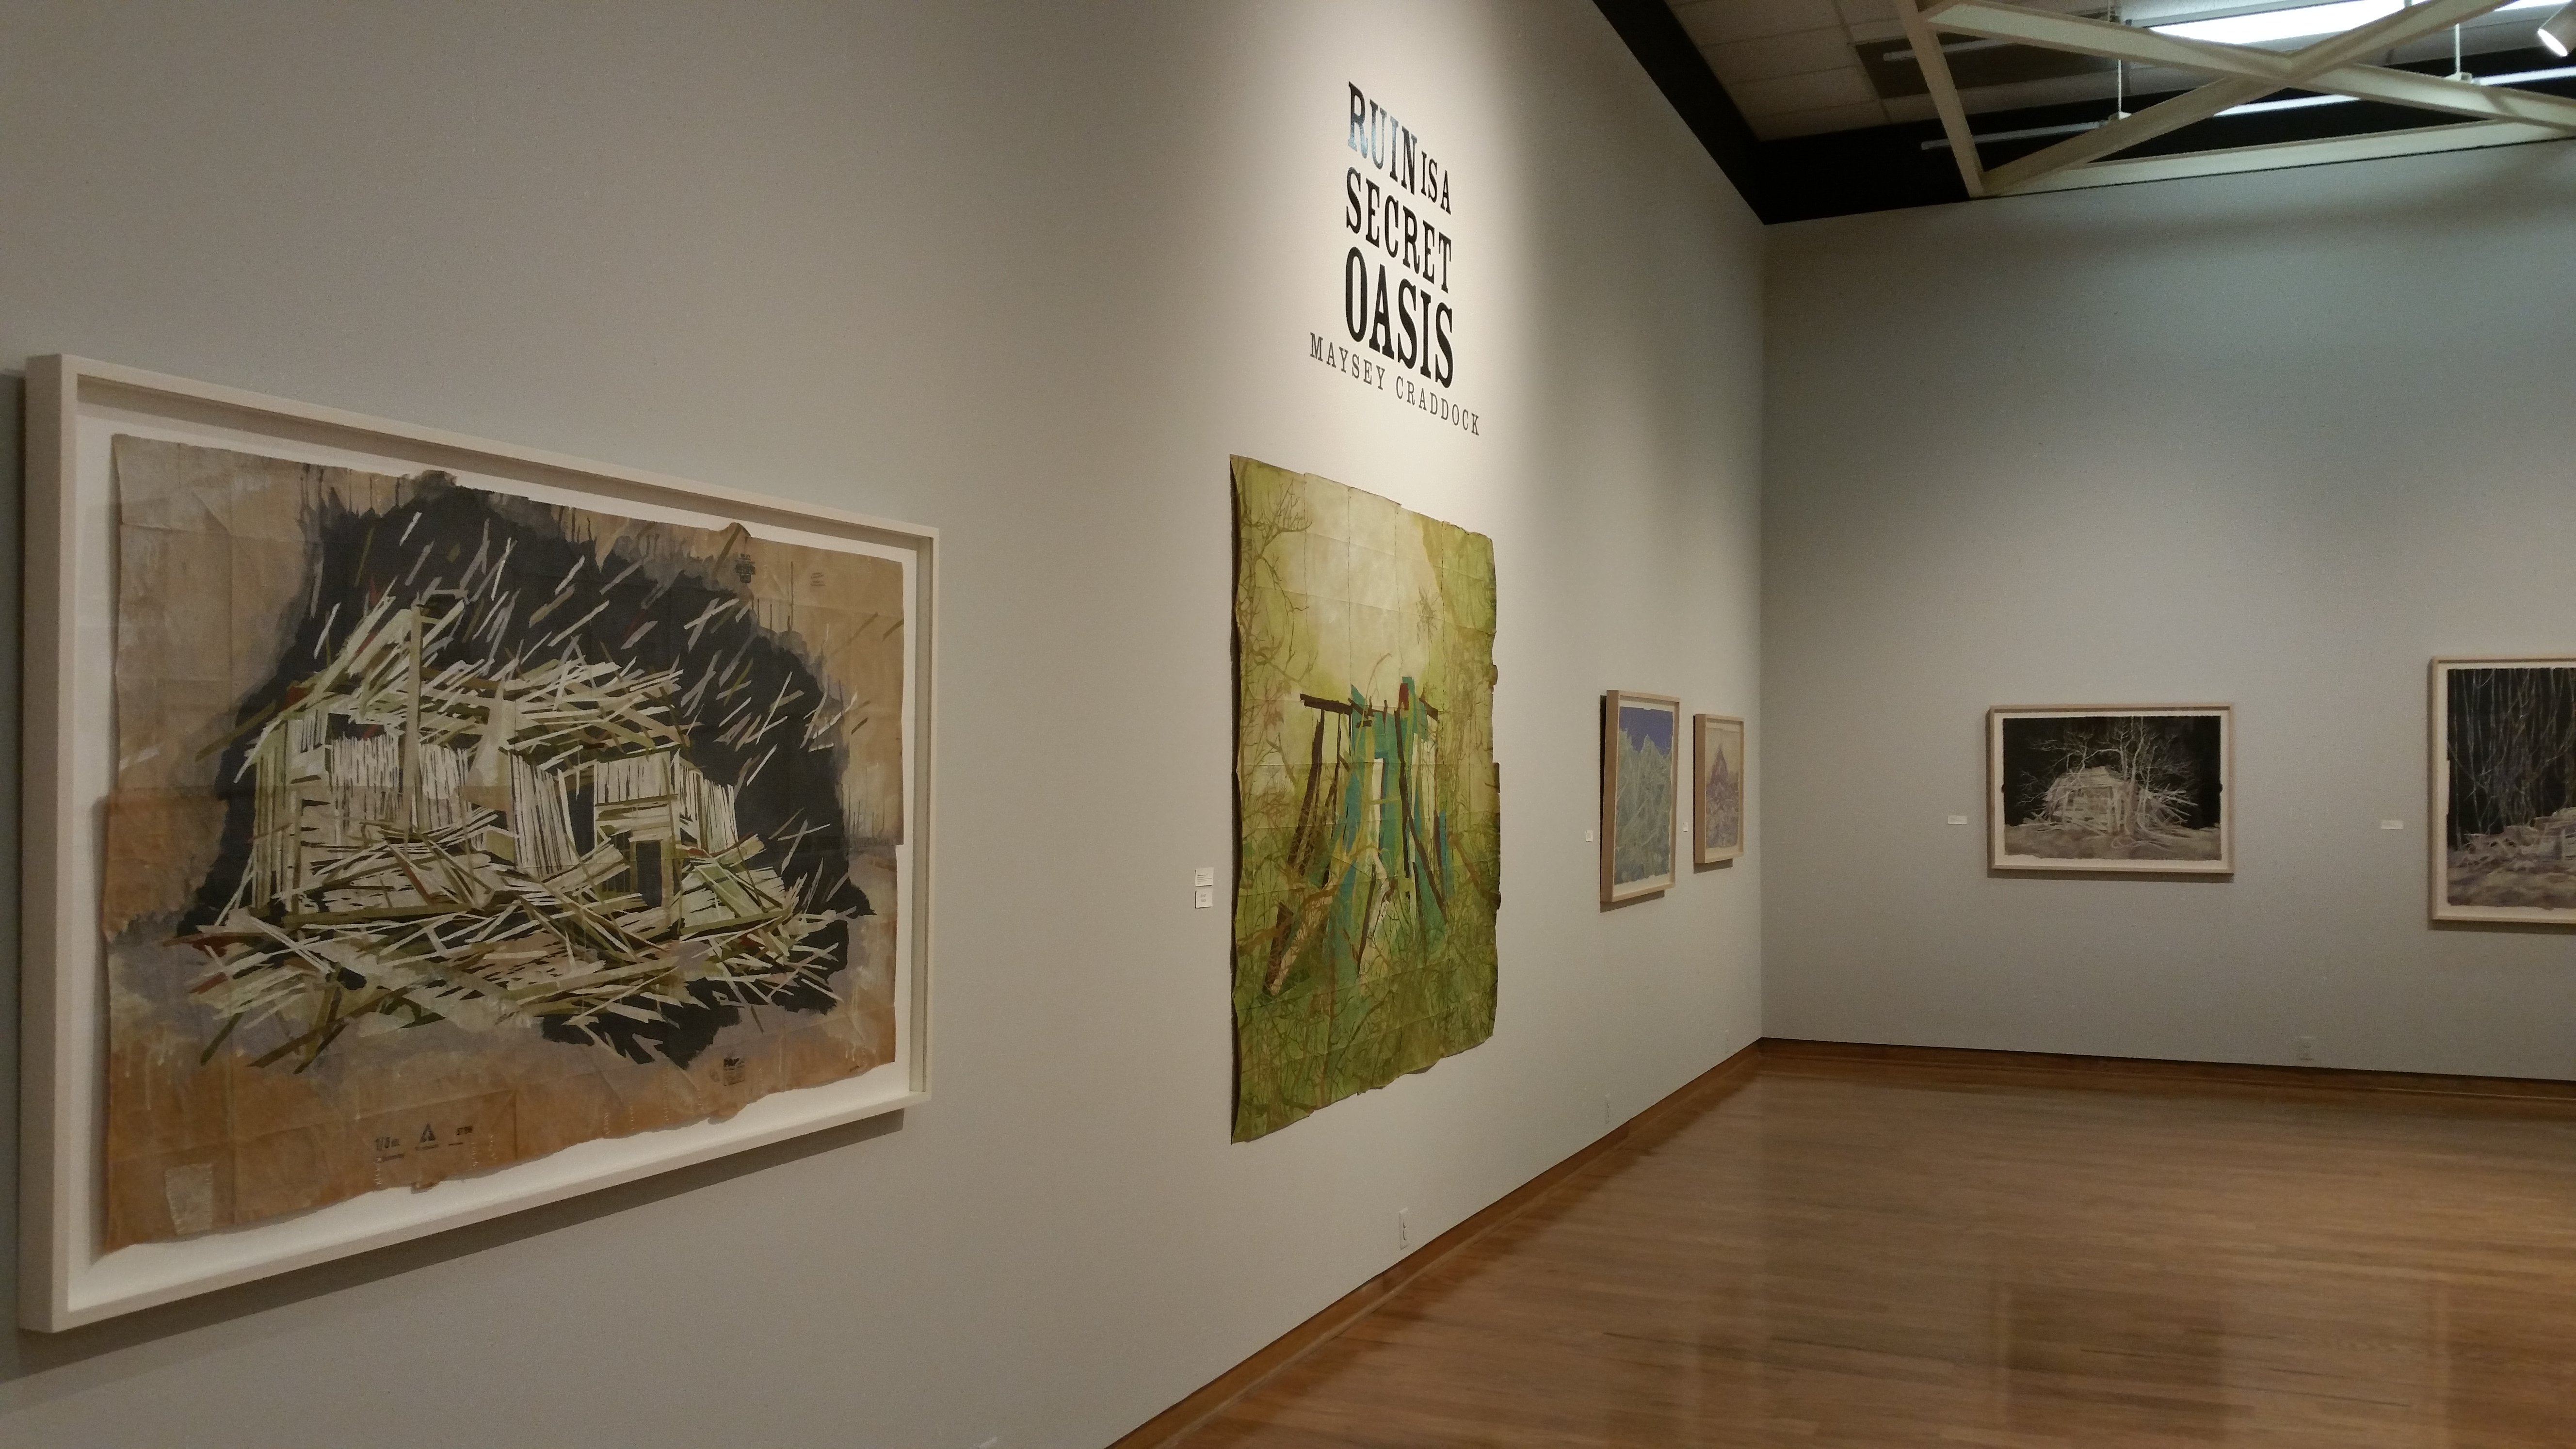 Installation view of "Ruin is a Secret Oasis" at the University of Mississippi Museum, a solo exhibition by Memphis artist Maysey Craddock.